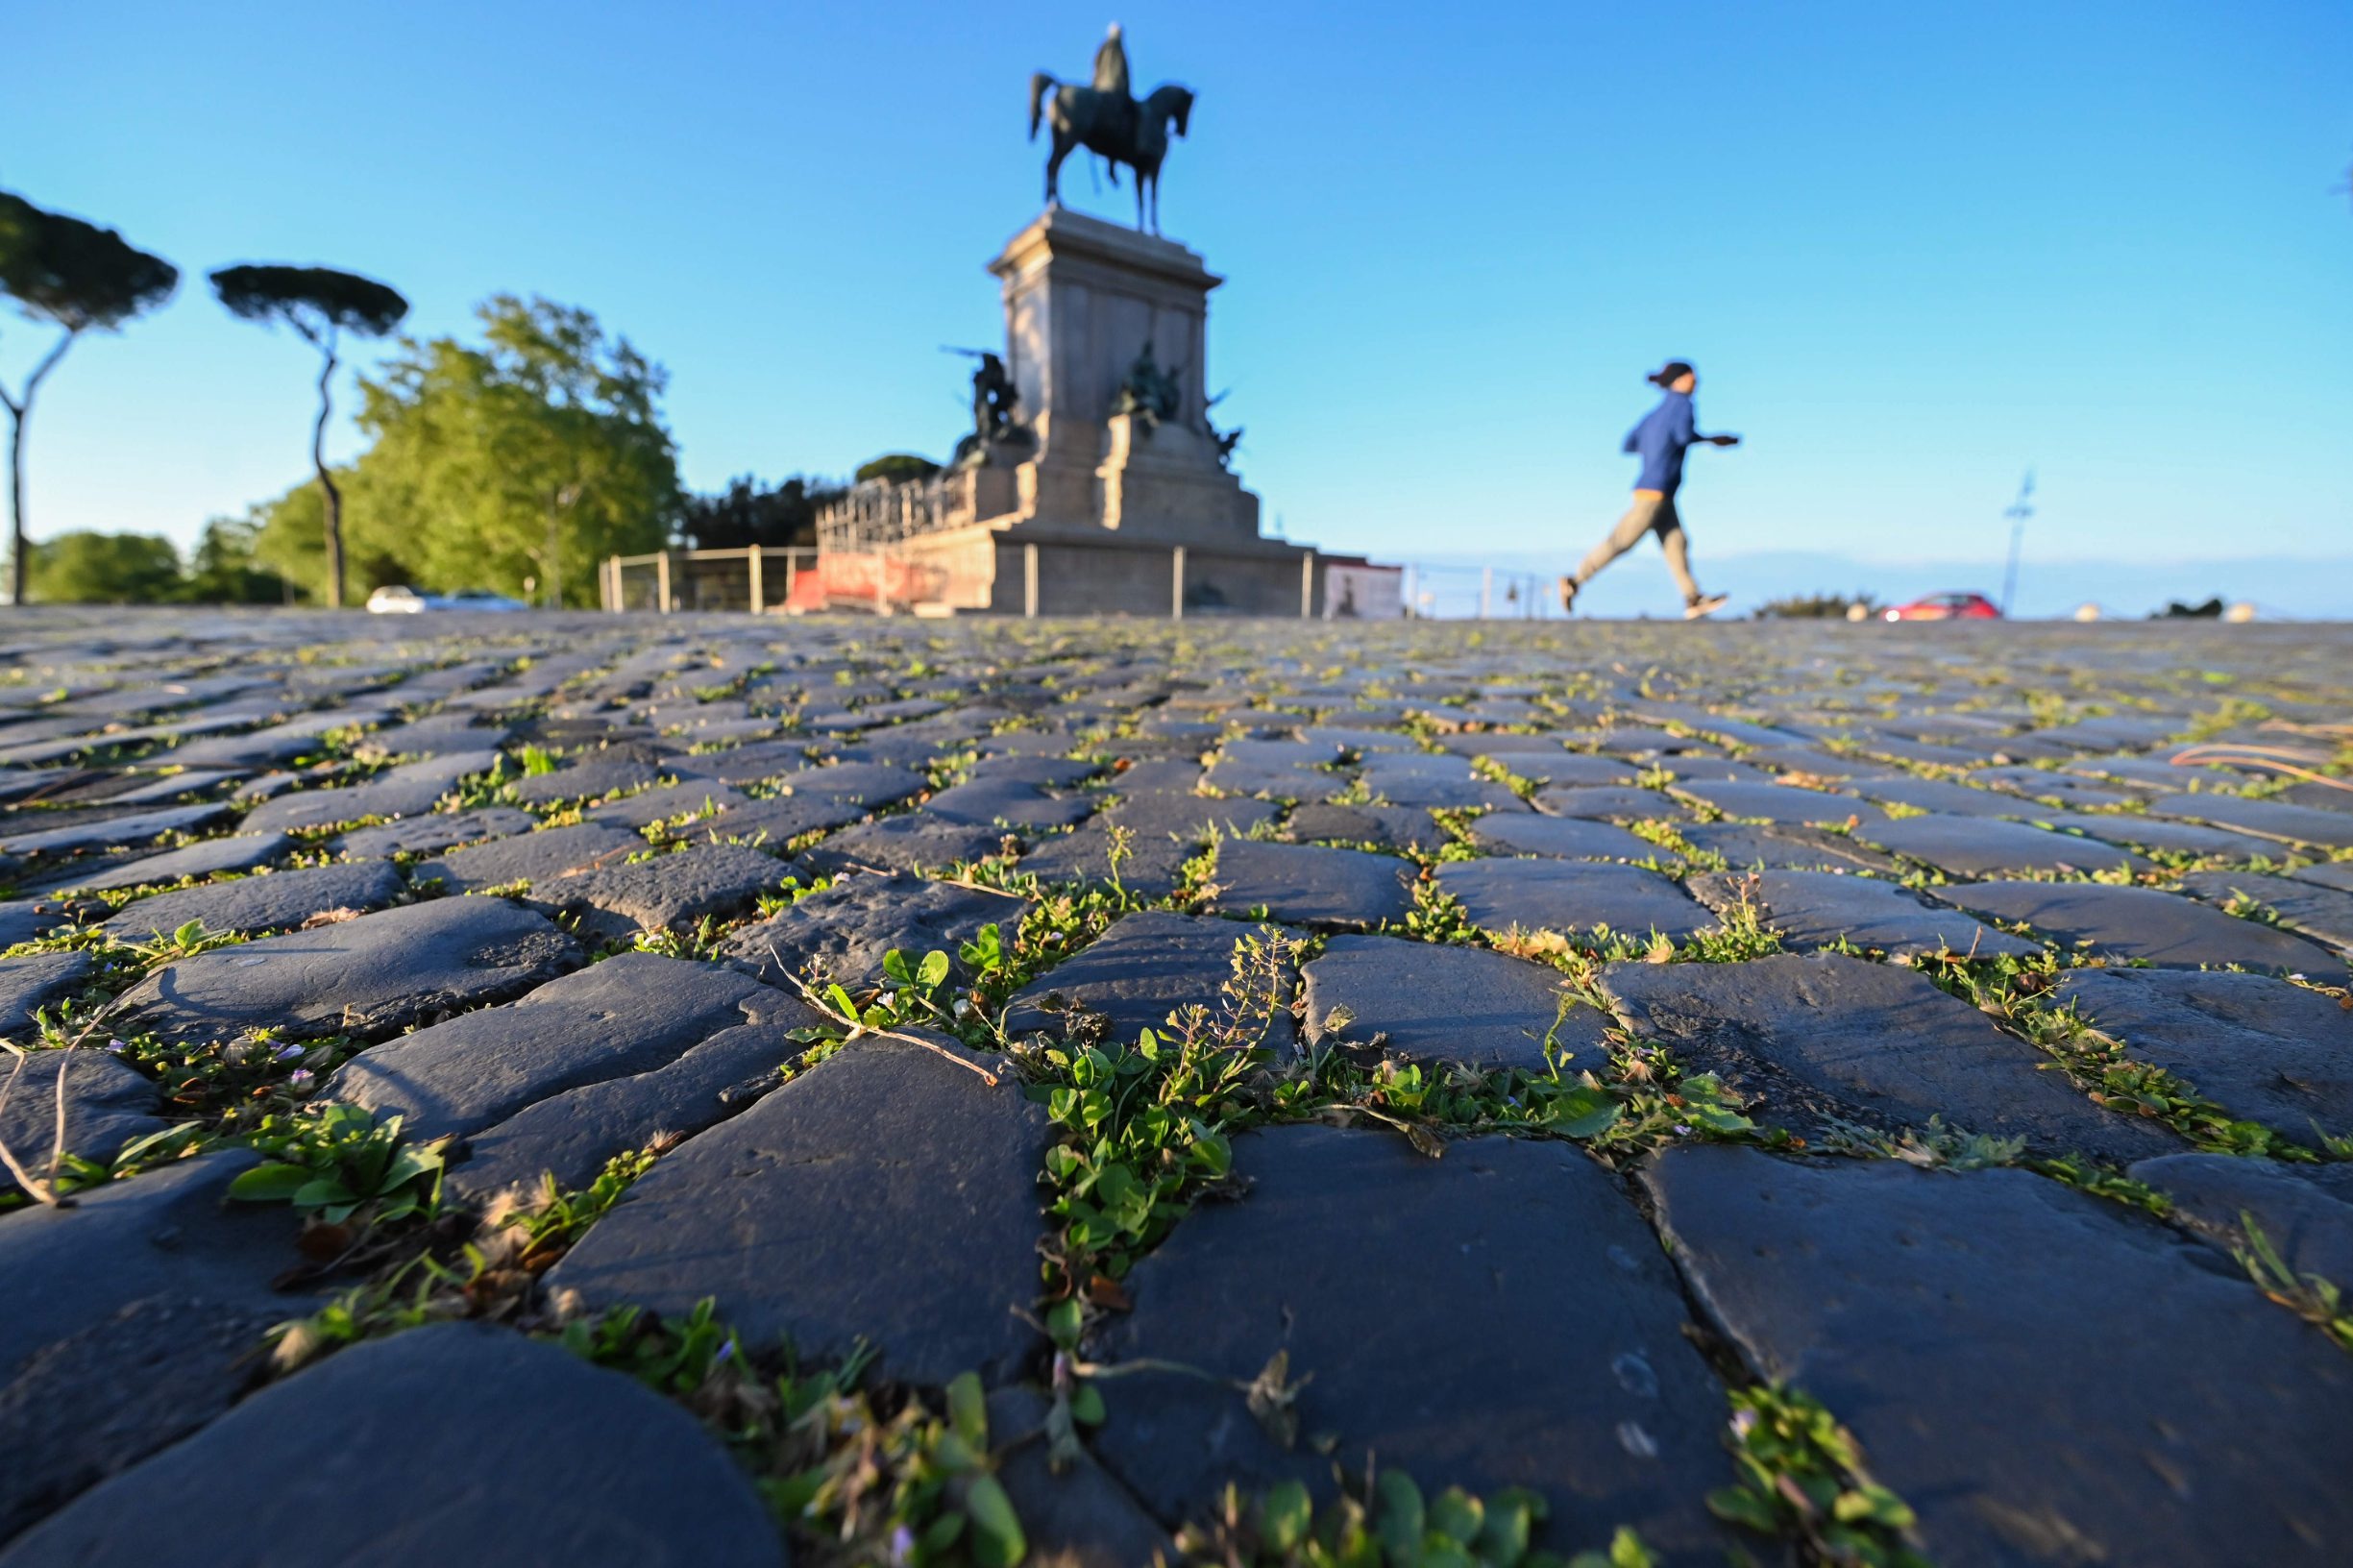 TOPSHOT - Grass grows between the road's cobblestones as a woman jogs past the equestrian statue of Giuseppe Garibaldi on April 26, 2020 at the Gianicolo terrace overlooking Rome, during the country's lockdown aimed at curbing the spread of the COVID-19 infection, caused by the novel coronavirus. (Photo by ANDREAS SOLARO / AFP)